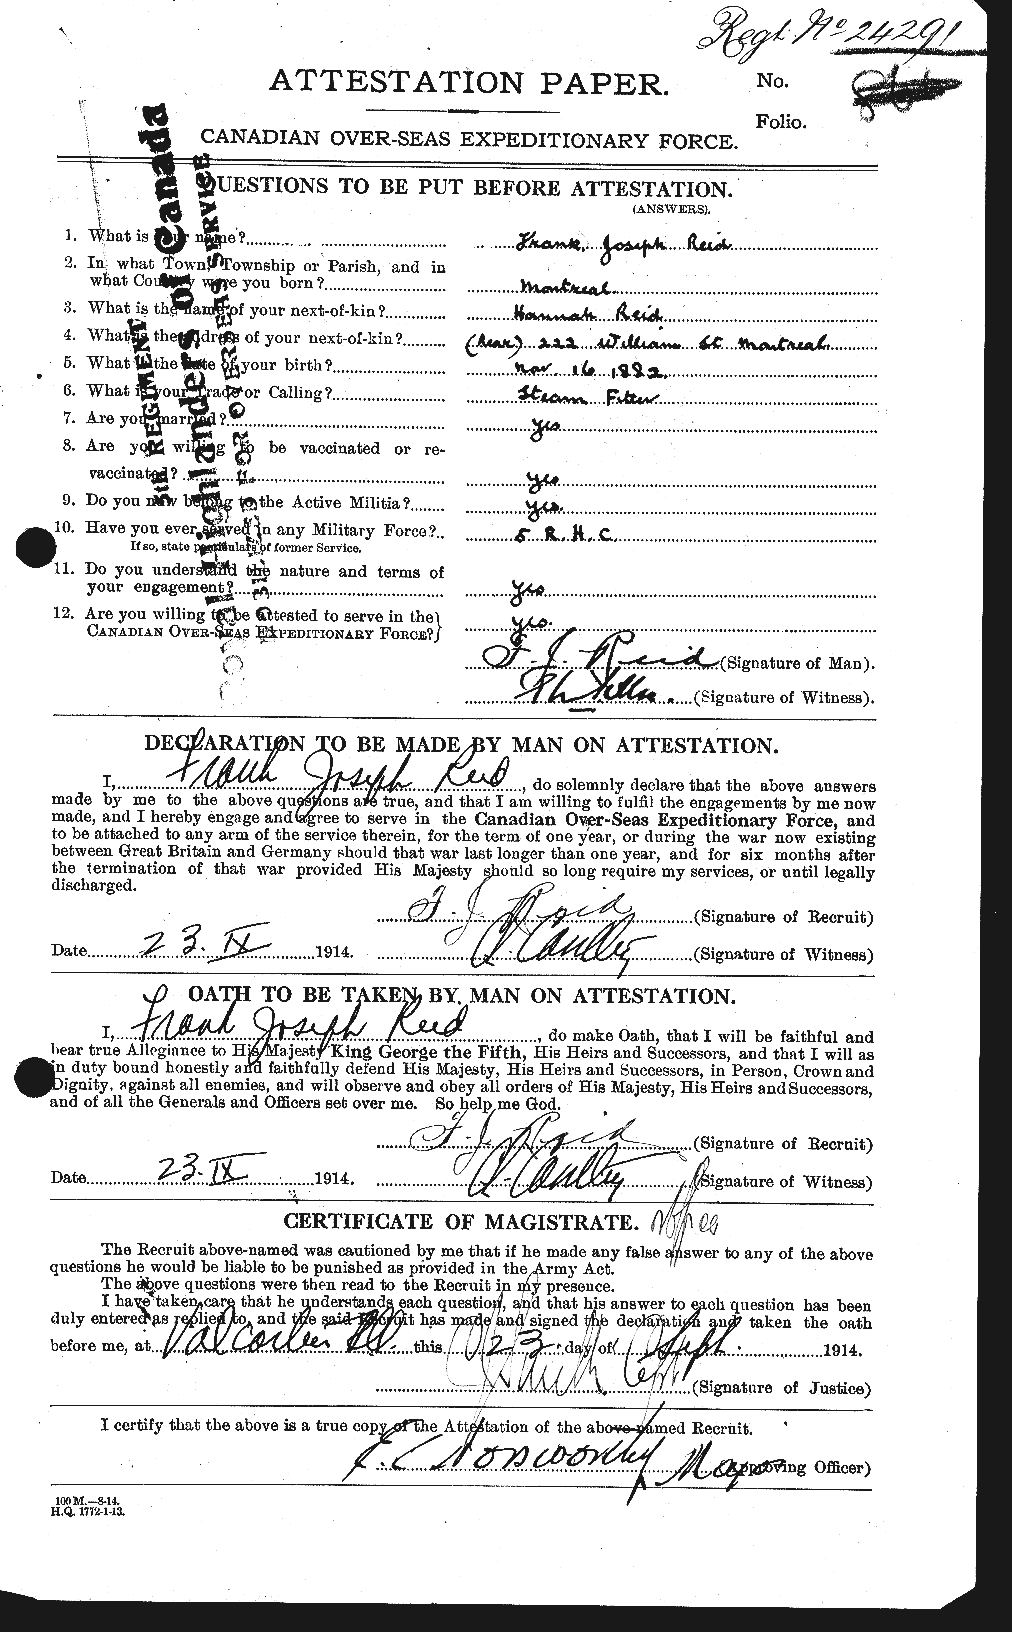 Personnel Records of the First World War - CEF 598049a